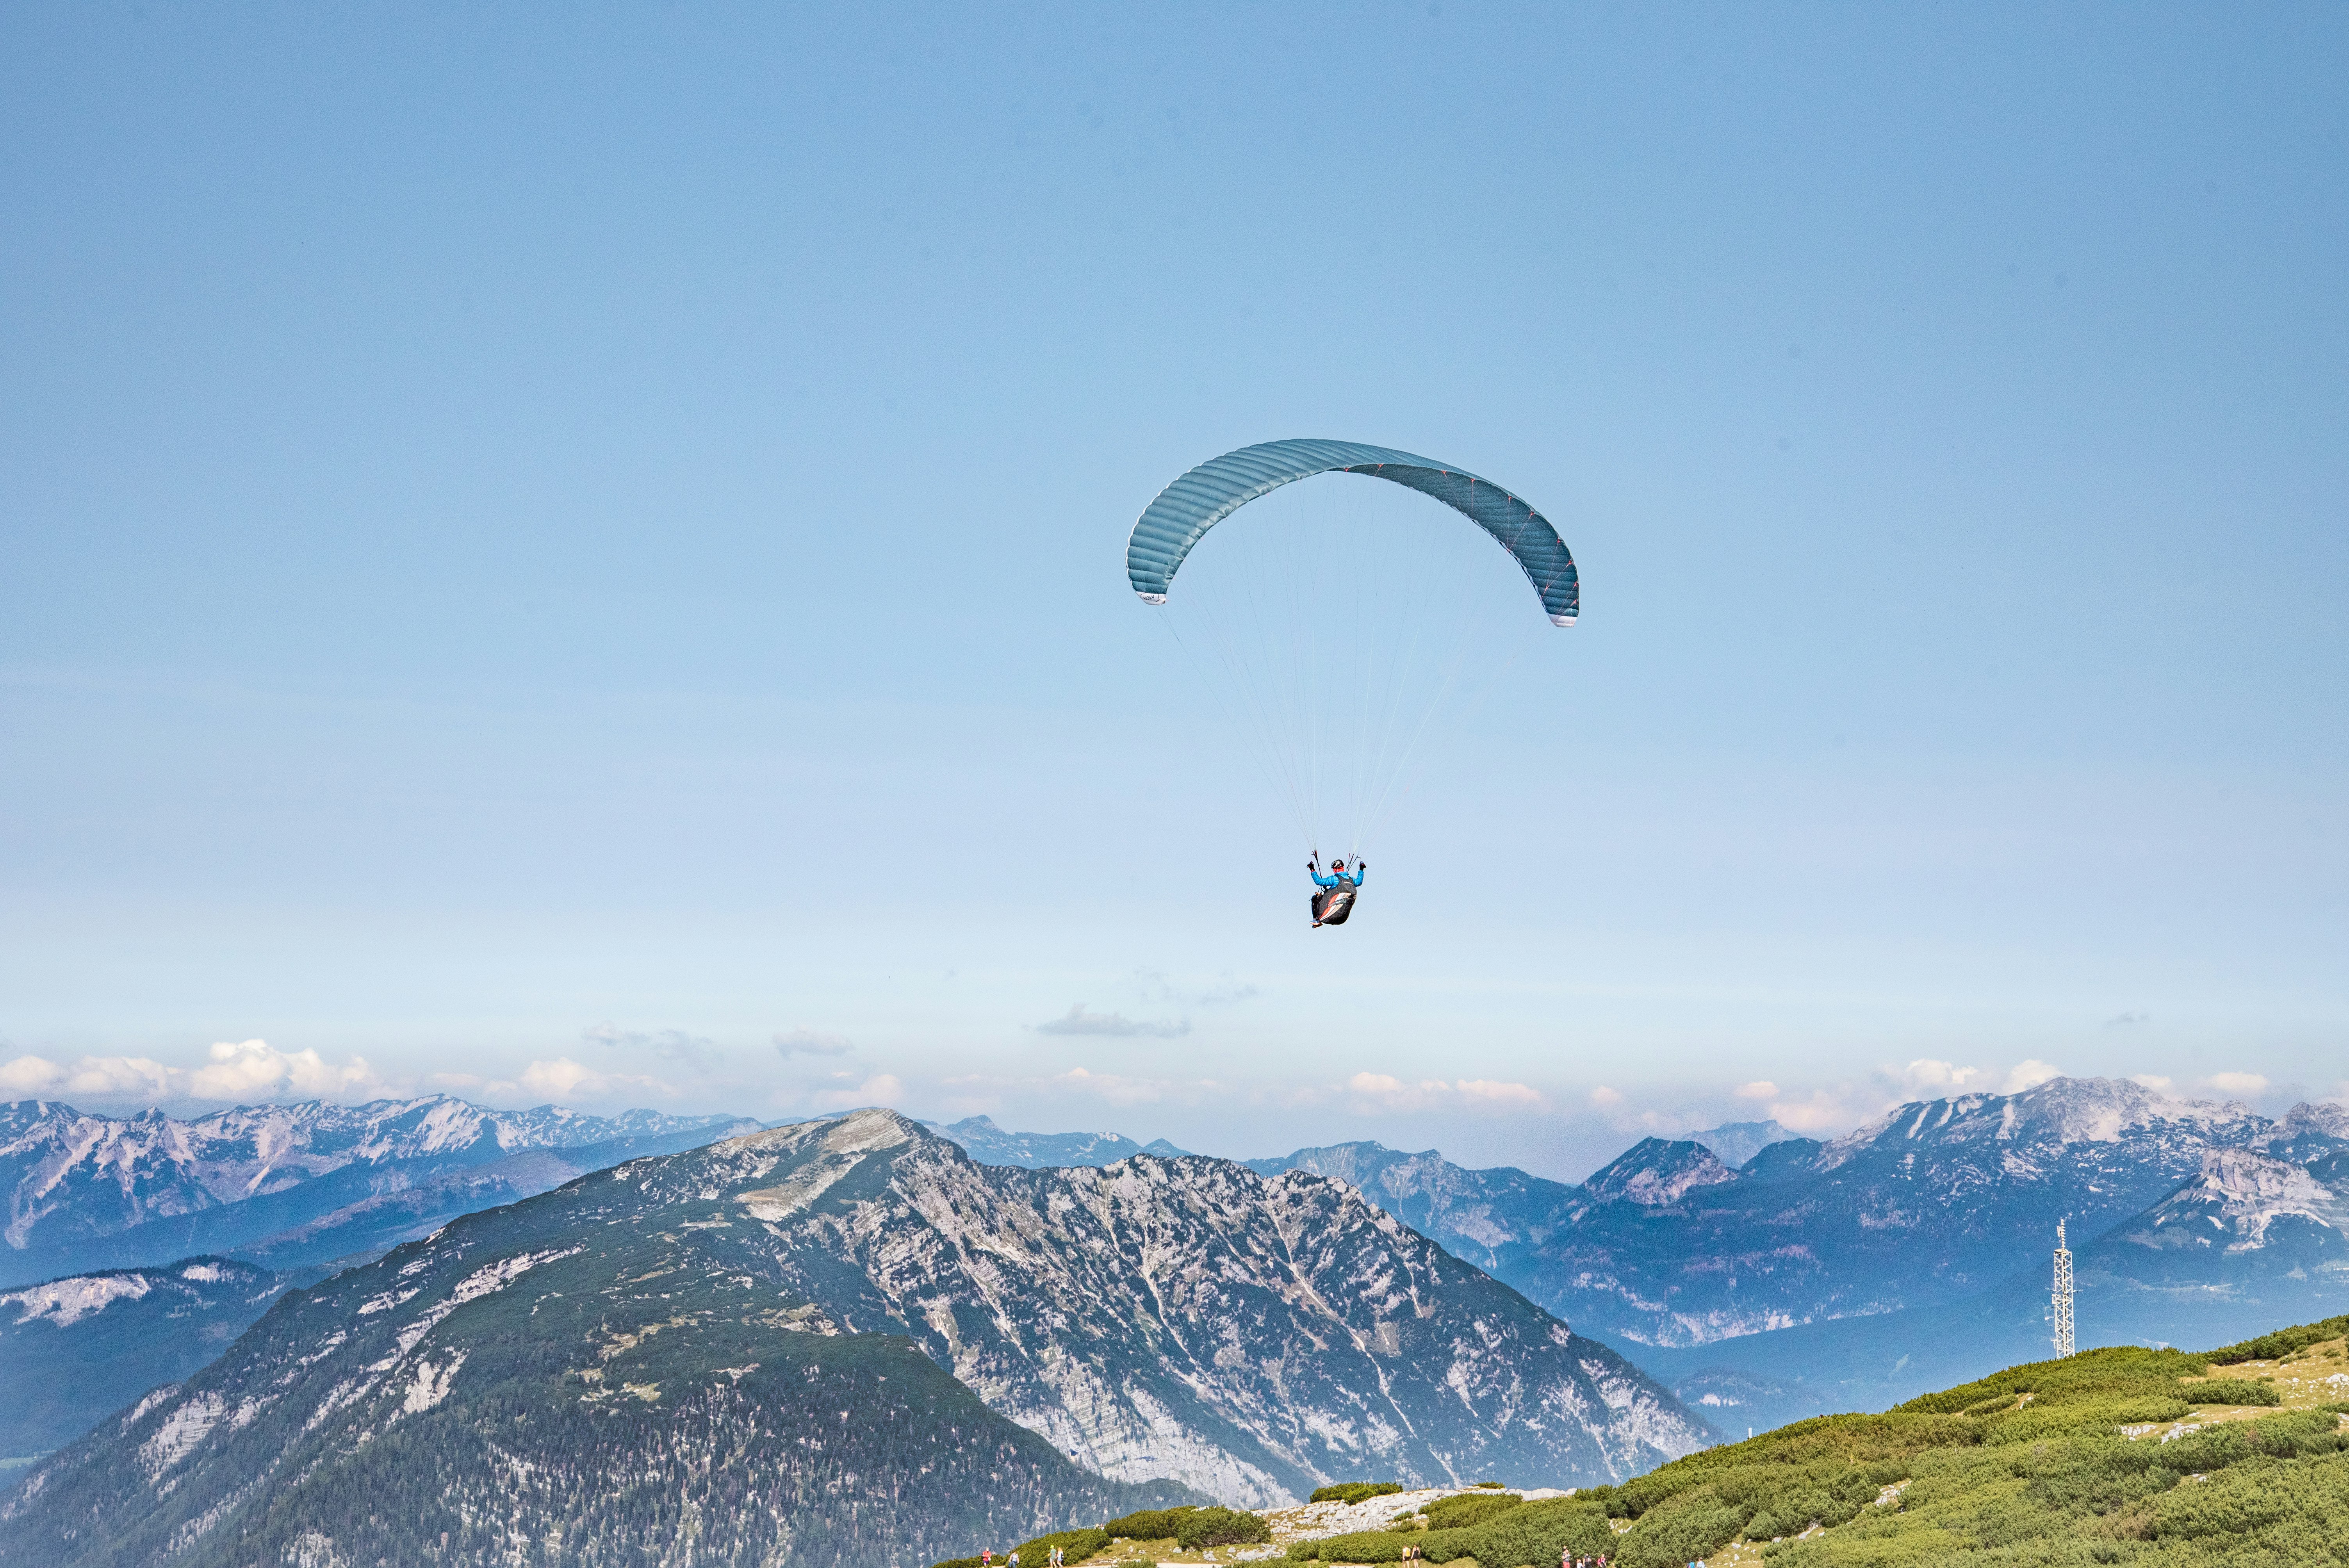 person riding parachute over green and brown mountains during daytime